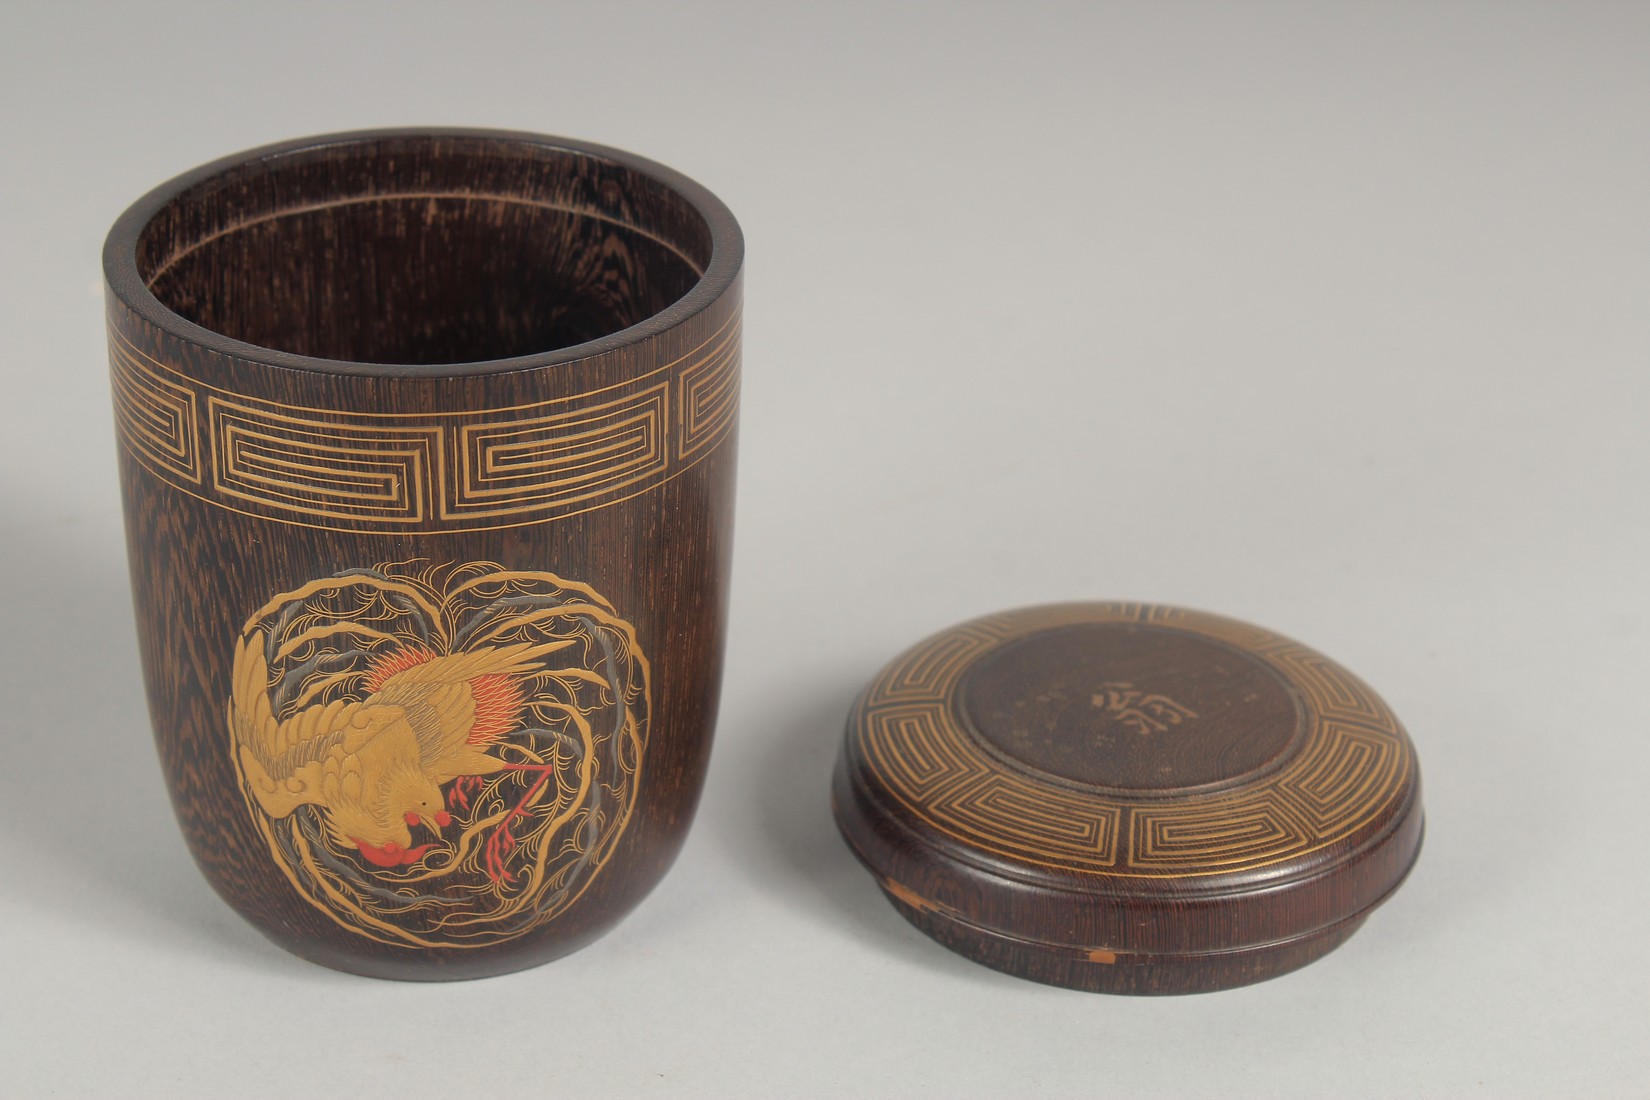 A FINE JAPANESE TURNED WOOD NATSUME / TEA CADDY, with a band of gilded key decoration to the lid and - Image 5 of 9